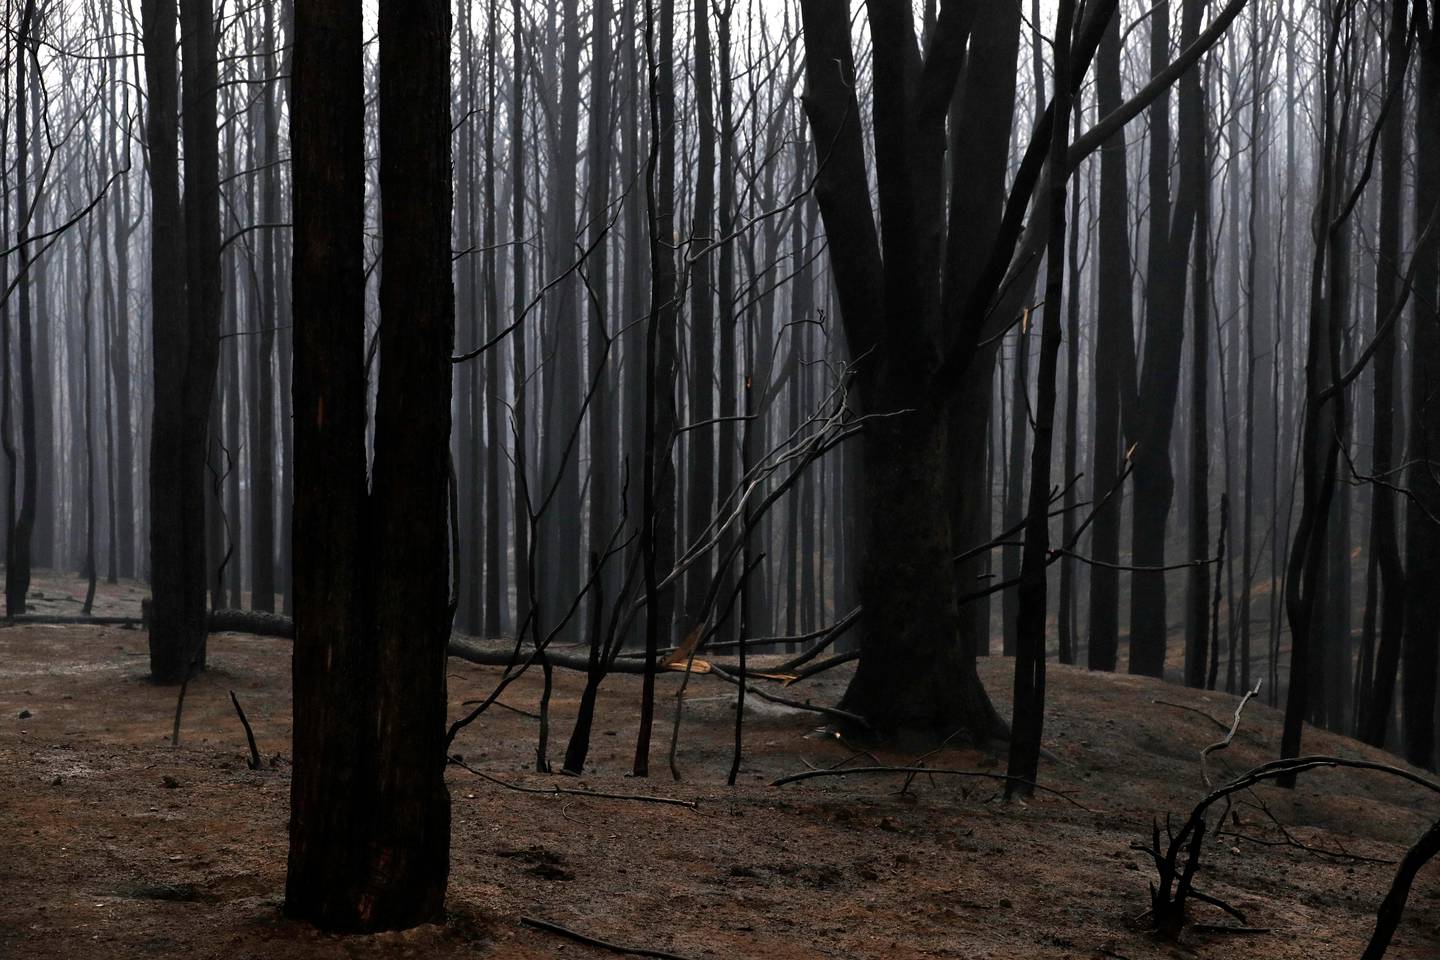 Blackened trees poke through the scorched ground after a wildfire ripped through near Kangaroo Valley, Australia, Sunday, Jan. 5, 2020. The deadly wildfires, which have been raging since September, have already burned about 5 million hectares (12.35 million acres) of land and destroyed more than 1,500 homes. (AP Photo/Rick Rycroft)